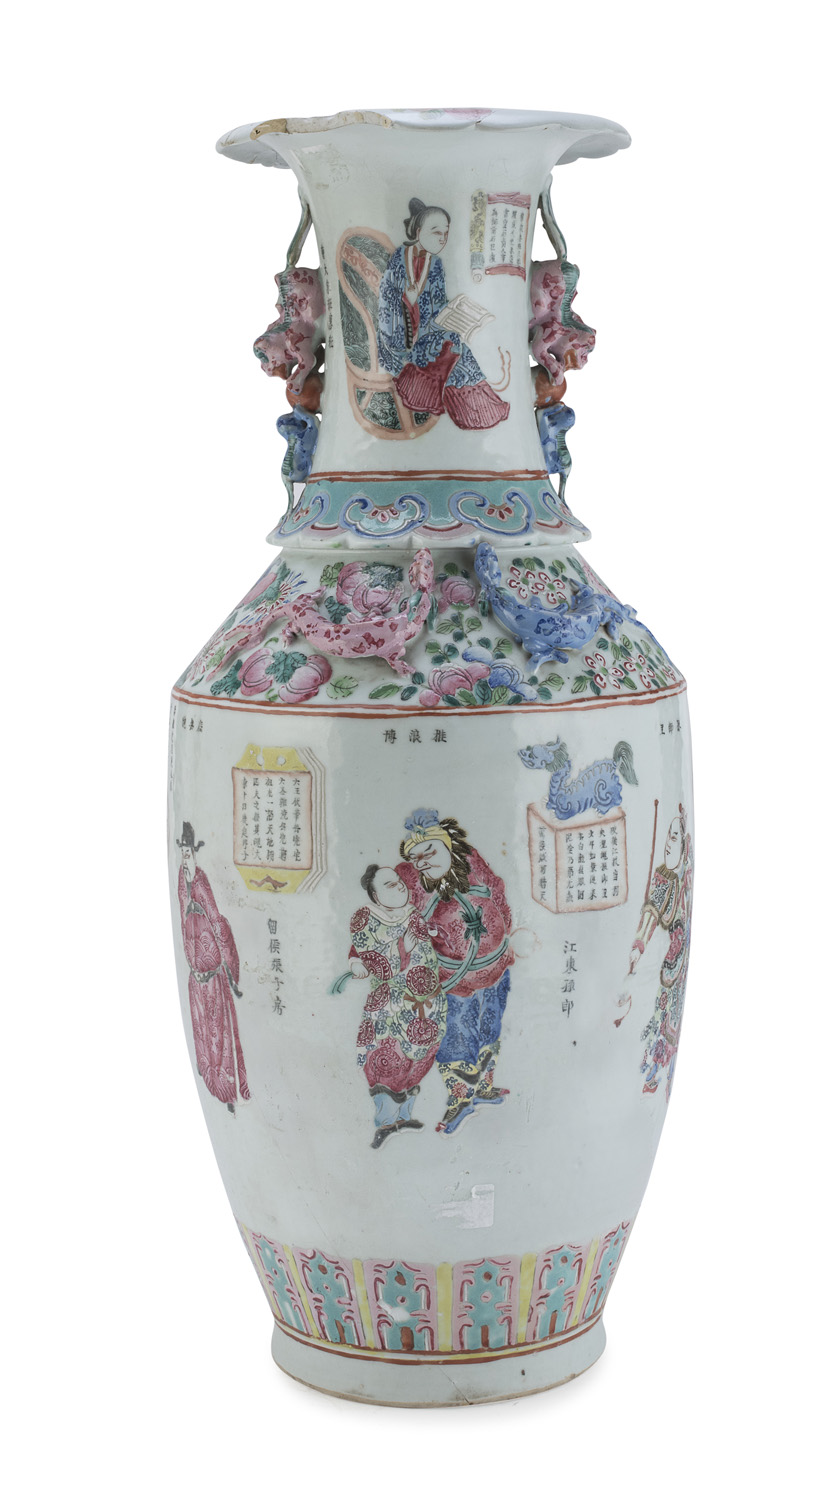 REMAIN OF CHINESE PORCELAIN VASE. EARLY 20TH CENTURY. DEFECTS AND MISSING PARTS.